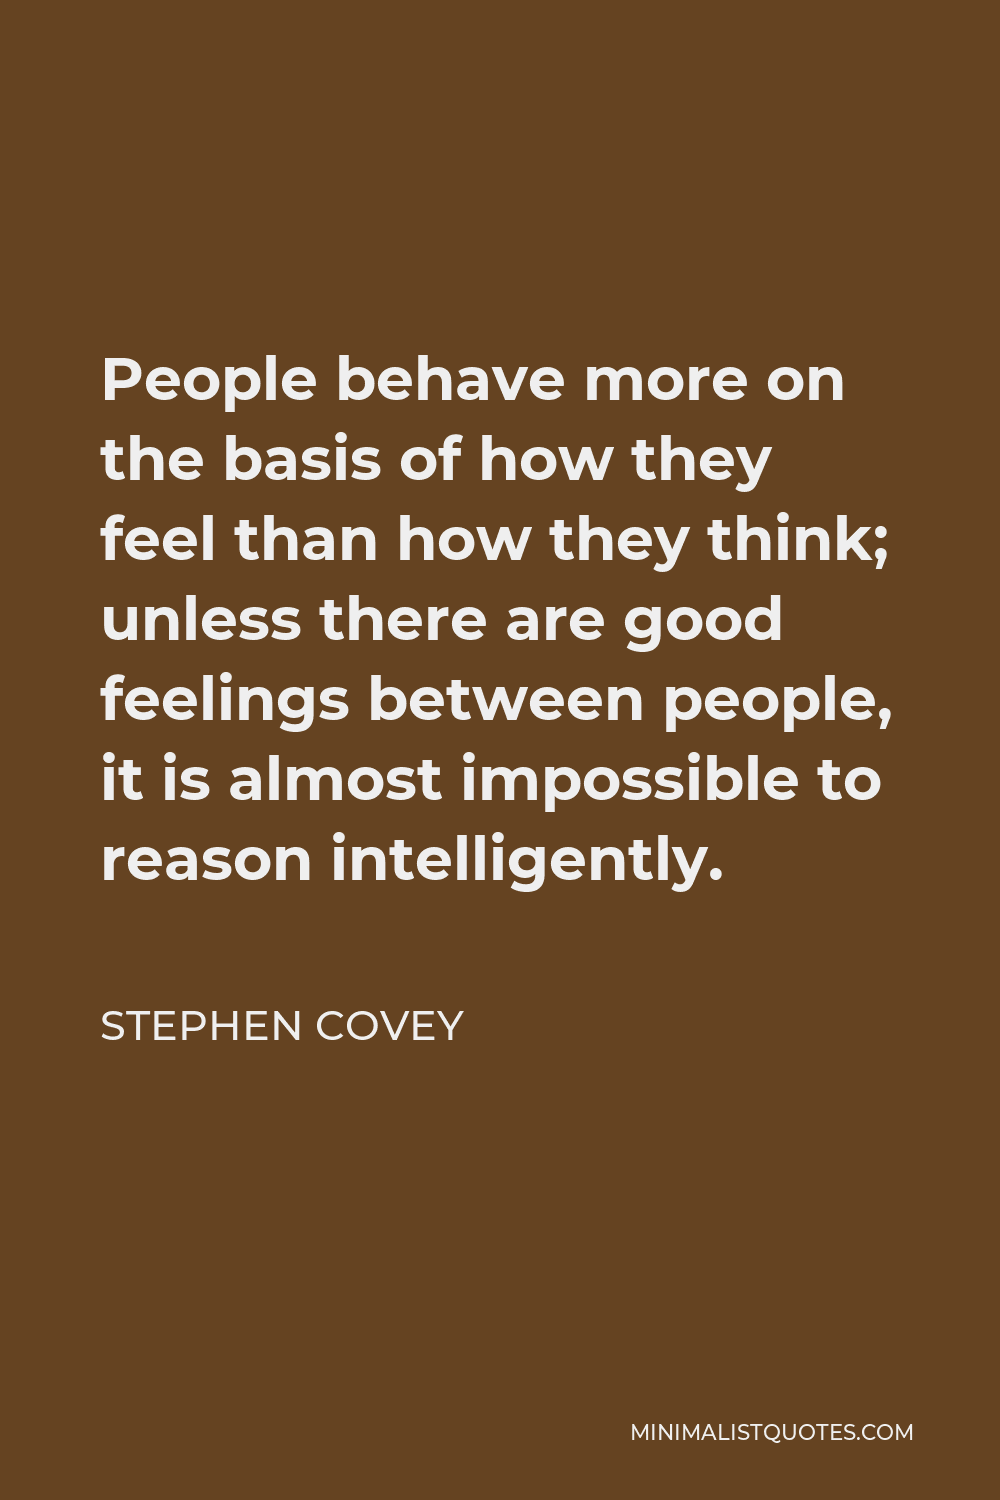 Stephen Covey Quote - People behave more on the basis of how they feel than how they think; unless there are good feelings between people, it is almost impossible to reason intelligently.